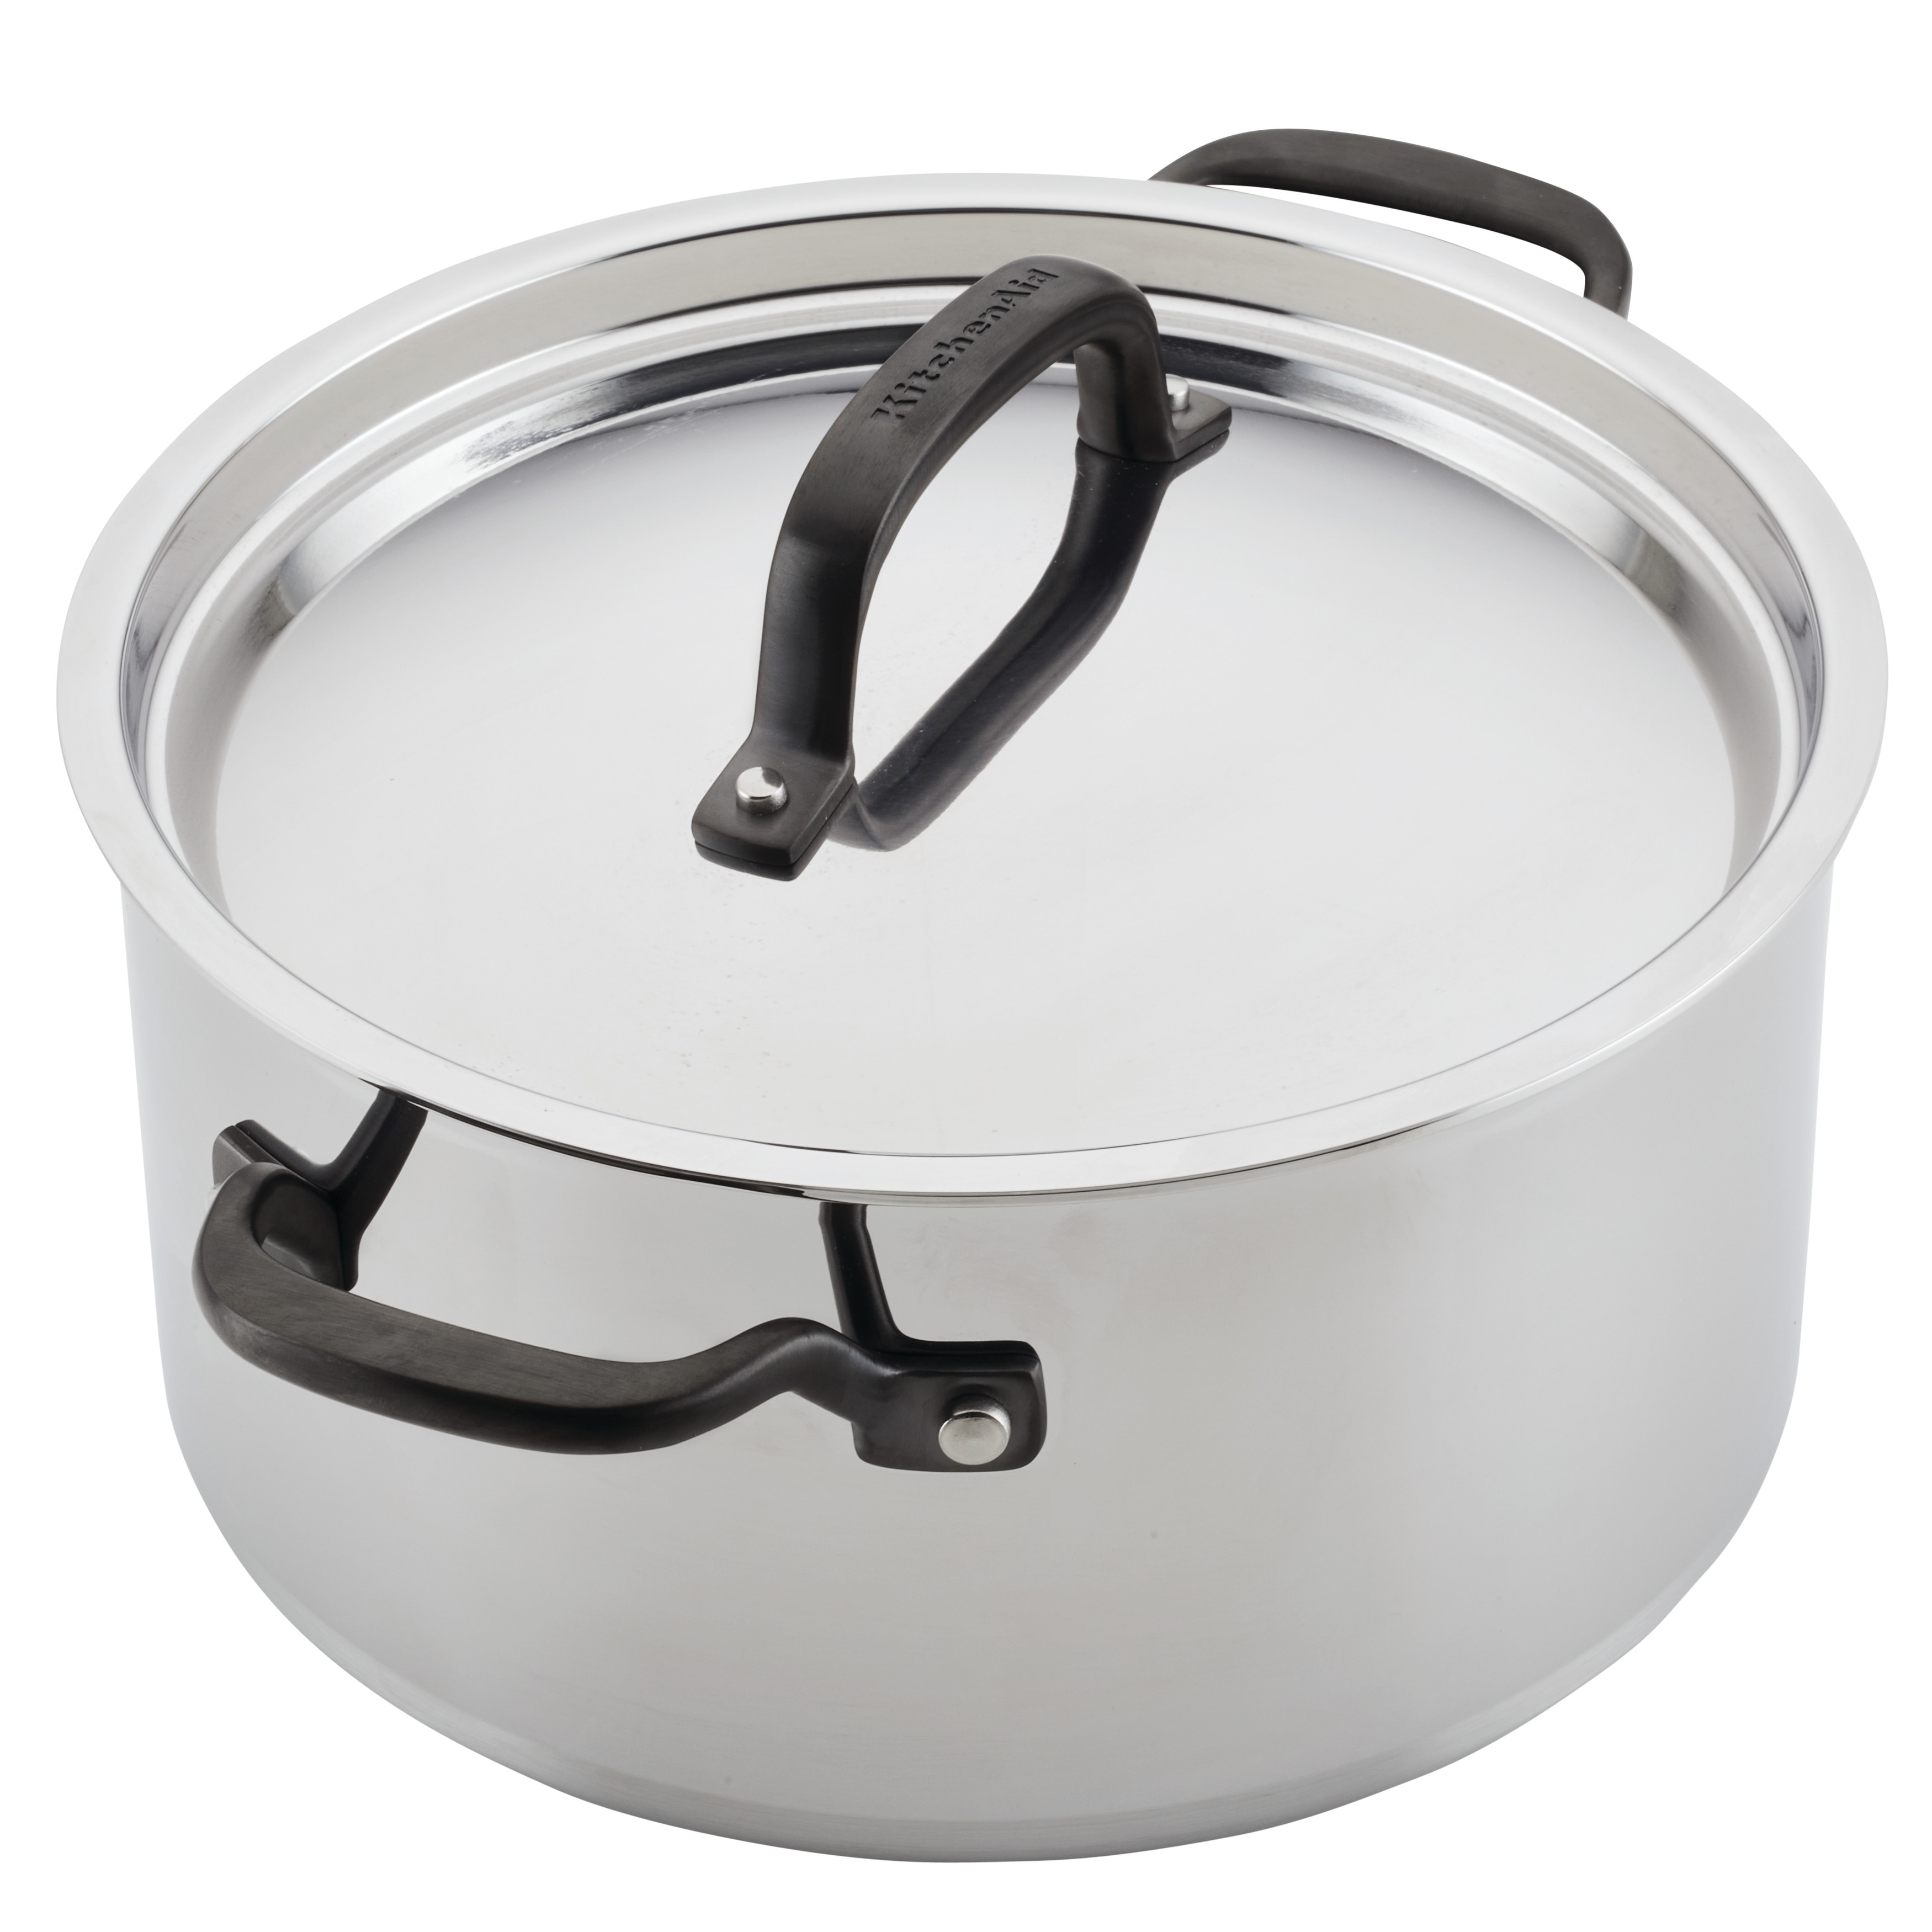 https://ak1.ostkcdn.com/images/products/is/images/direct/f0bcb51e839f2855df6d061e3559fb6ecc604cb9/KitchenAid-5-Ply-Clad-Stainless-Steel-Induction-Stockpot-with-Lid%2C-6-Quart%2C-Polished-Stainless-Steel.jpg